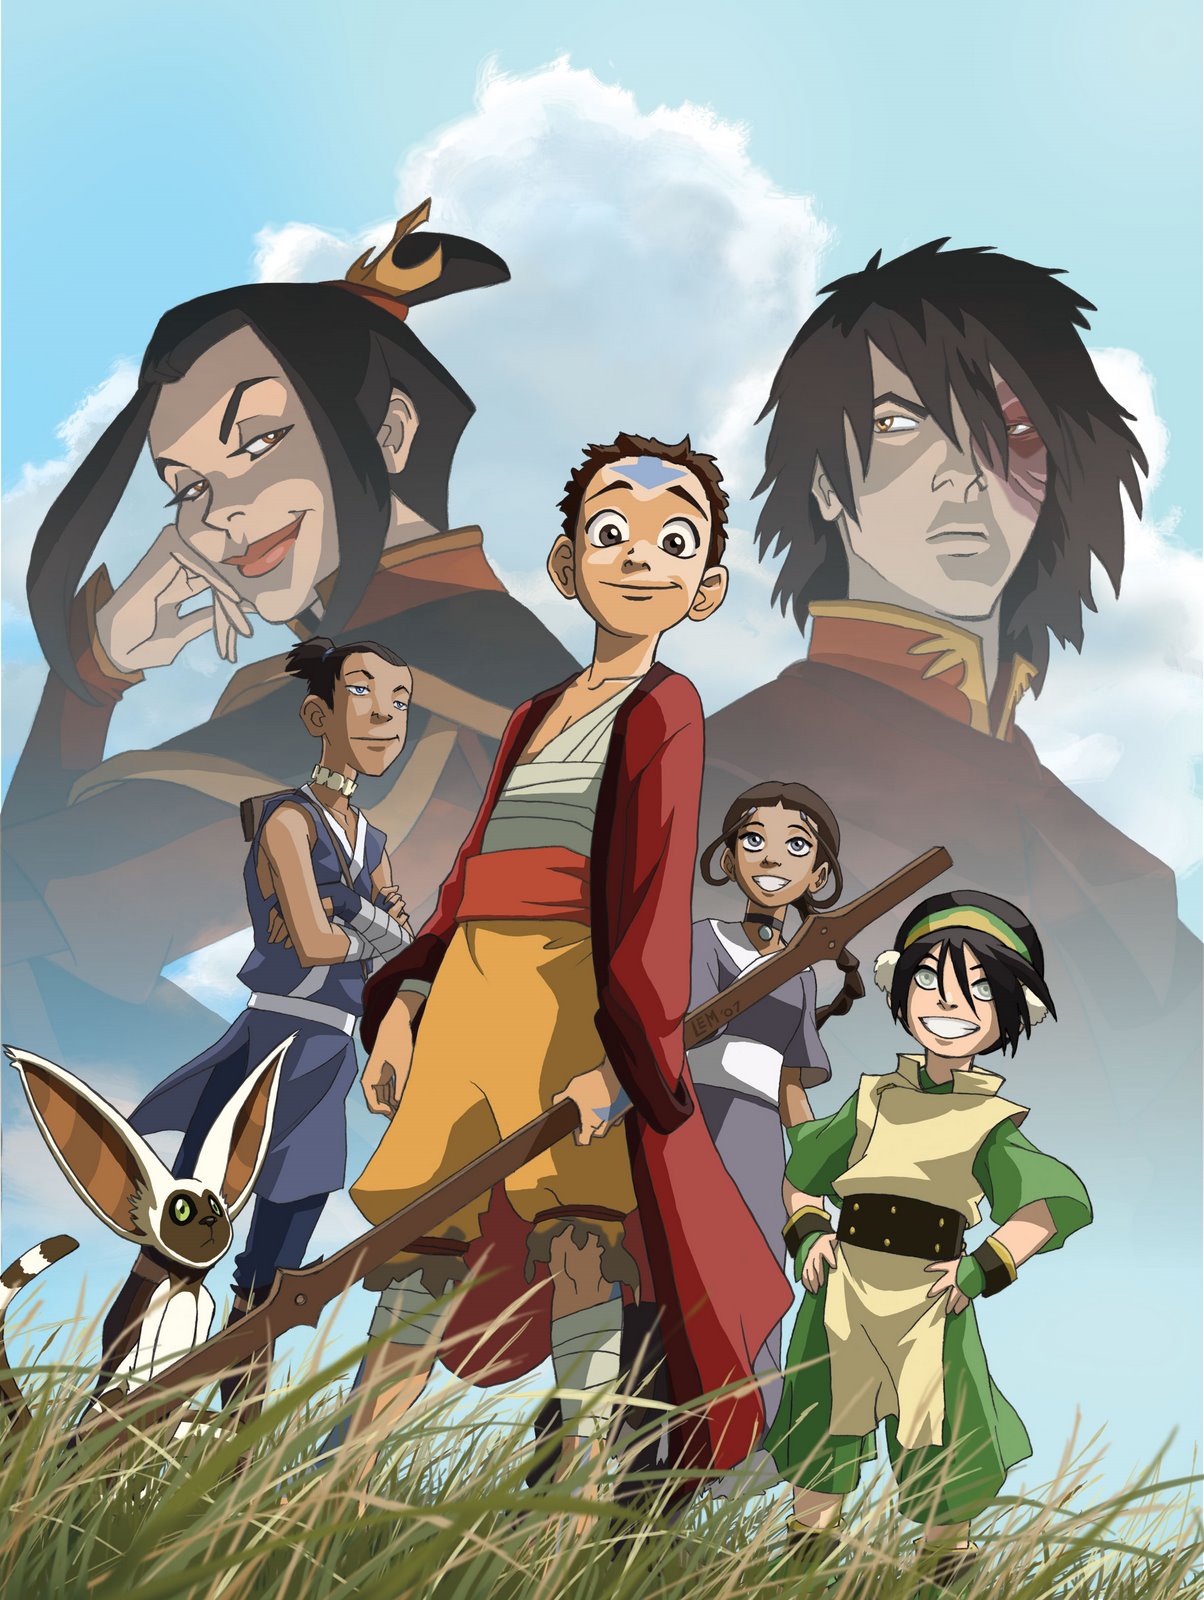 Avatar The Last Airbender Nickelodeon Developing 3 New Animated Films